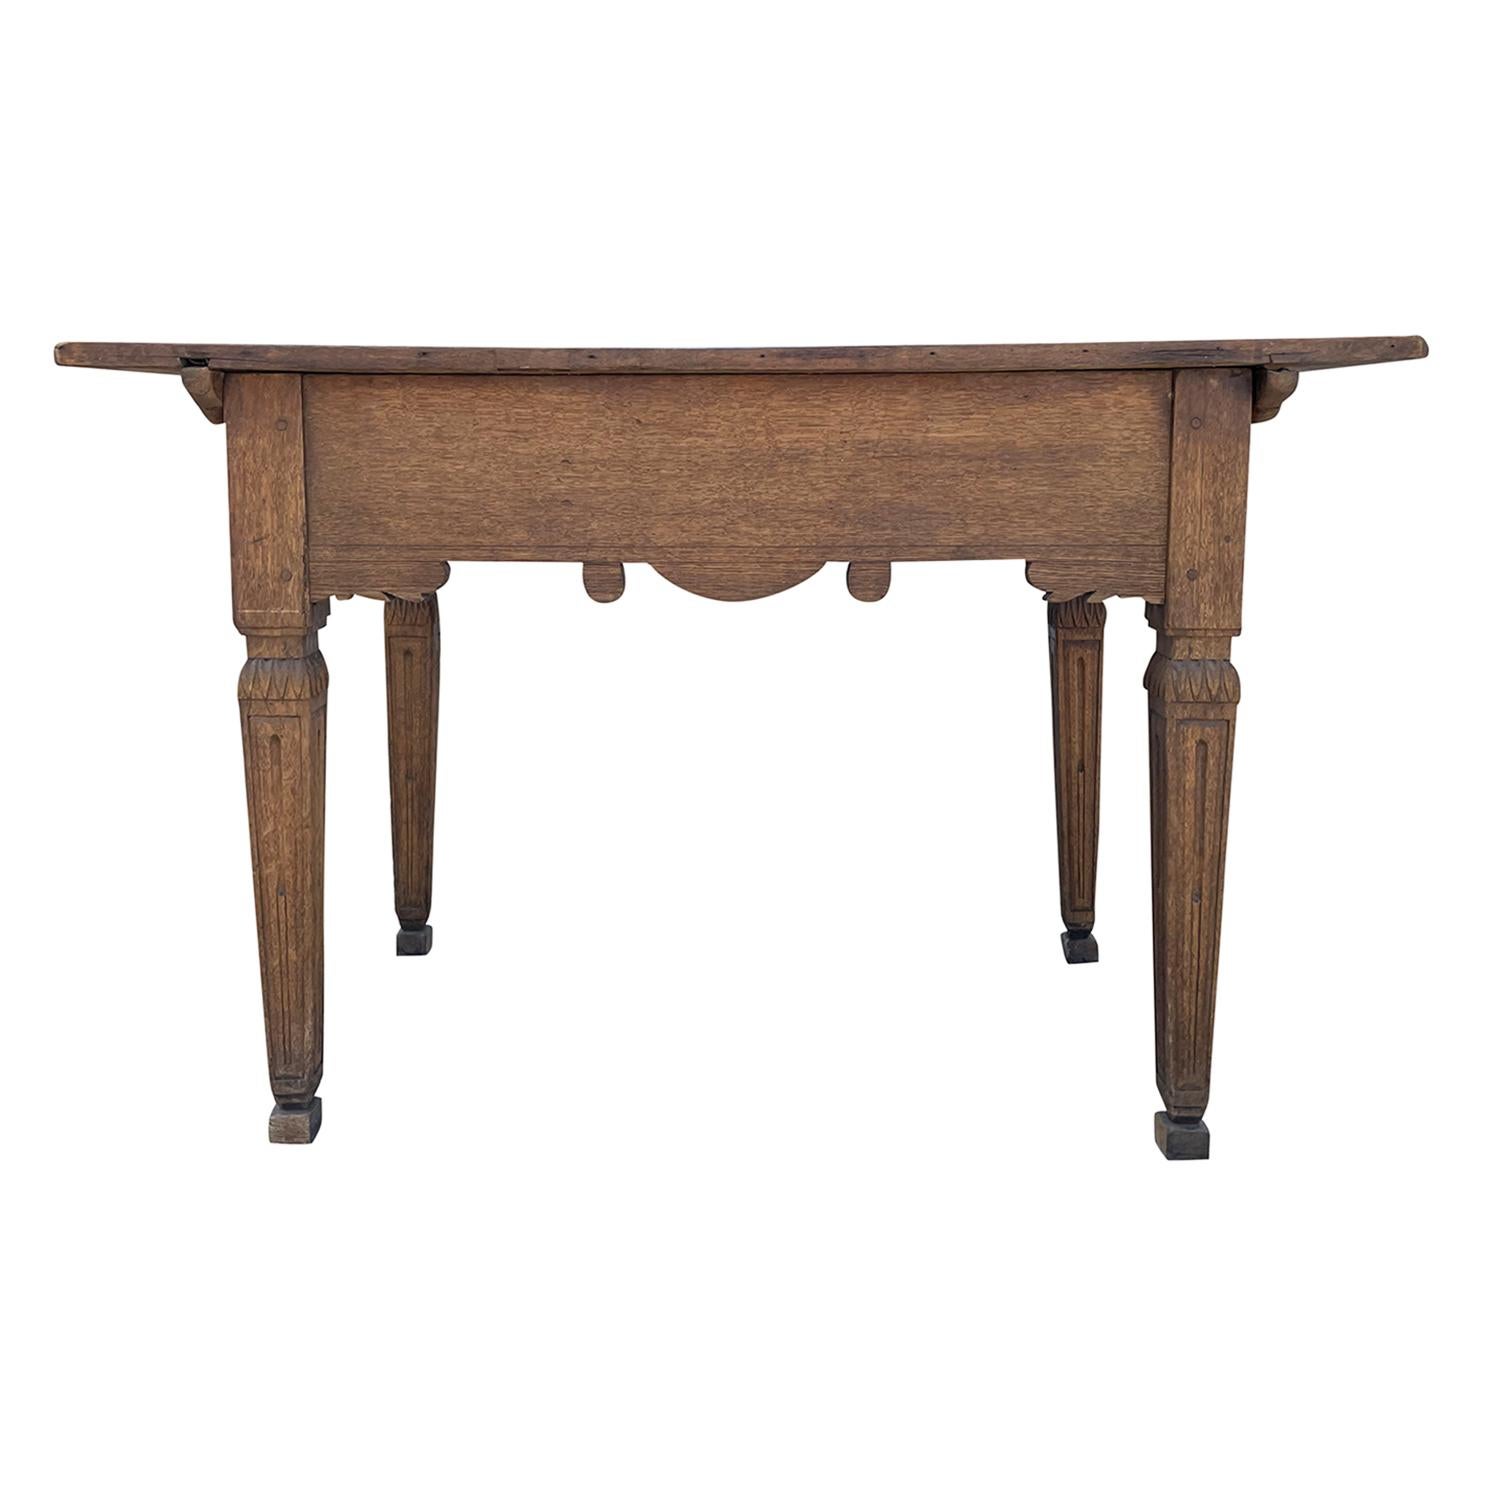 18th Century French Régence Console Table - Antique Oakwood Farm, End Table 1